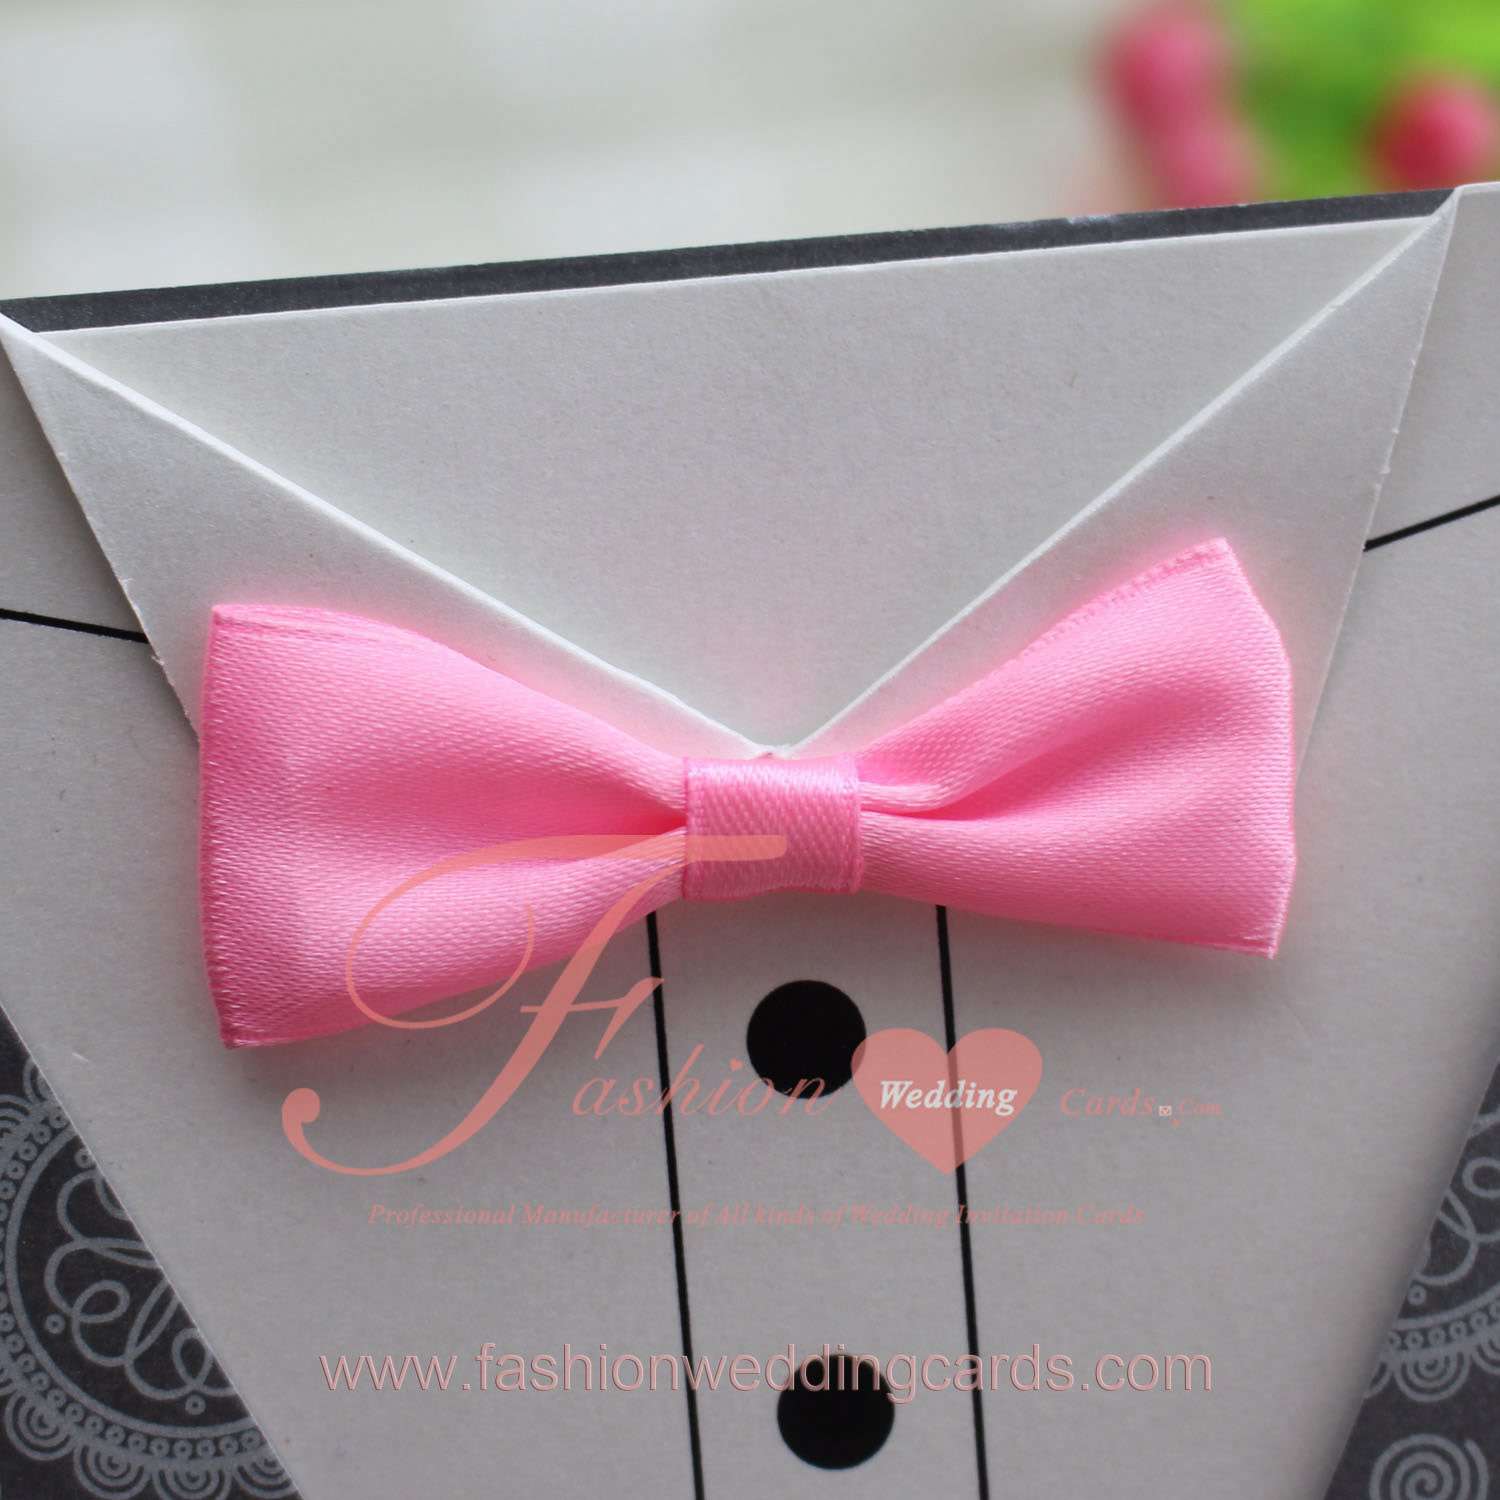 Print Your Own Wedding Invitations Free